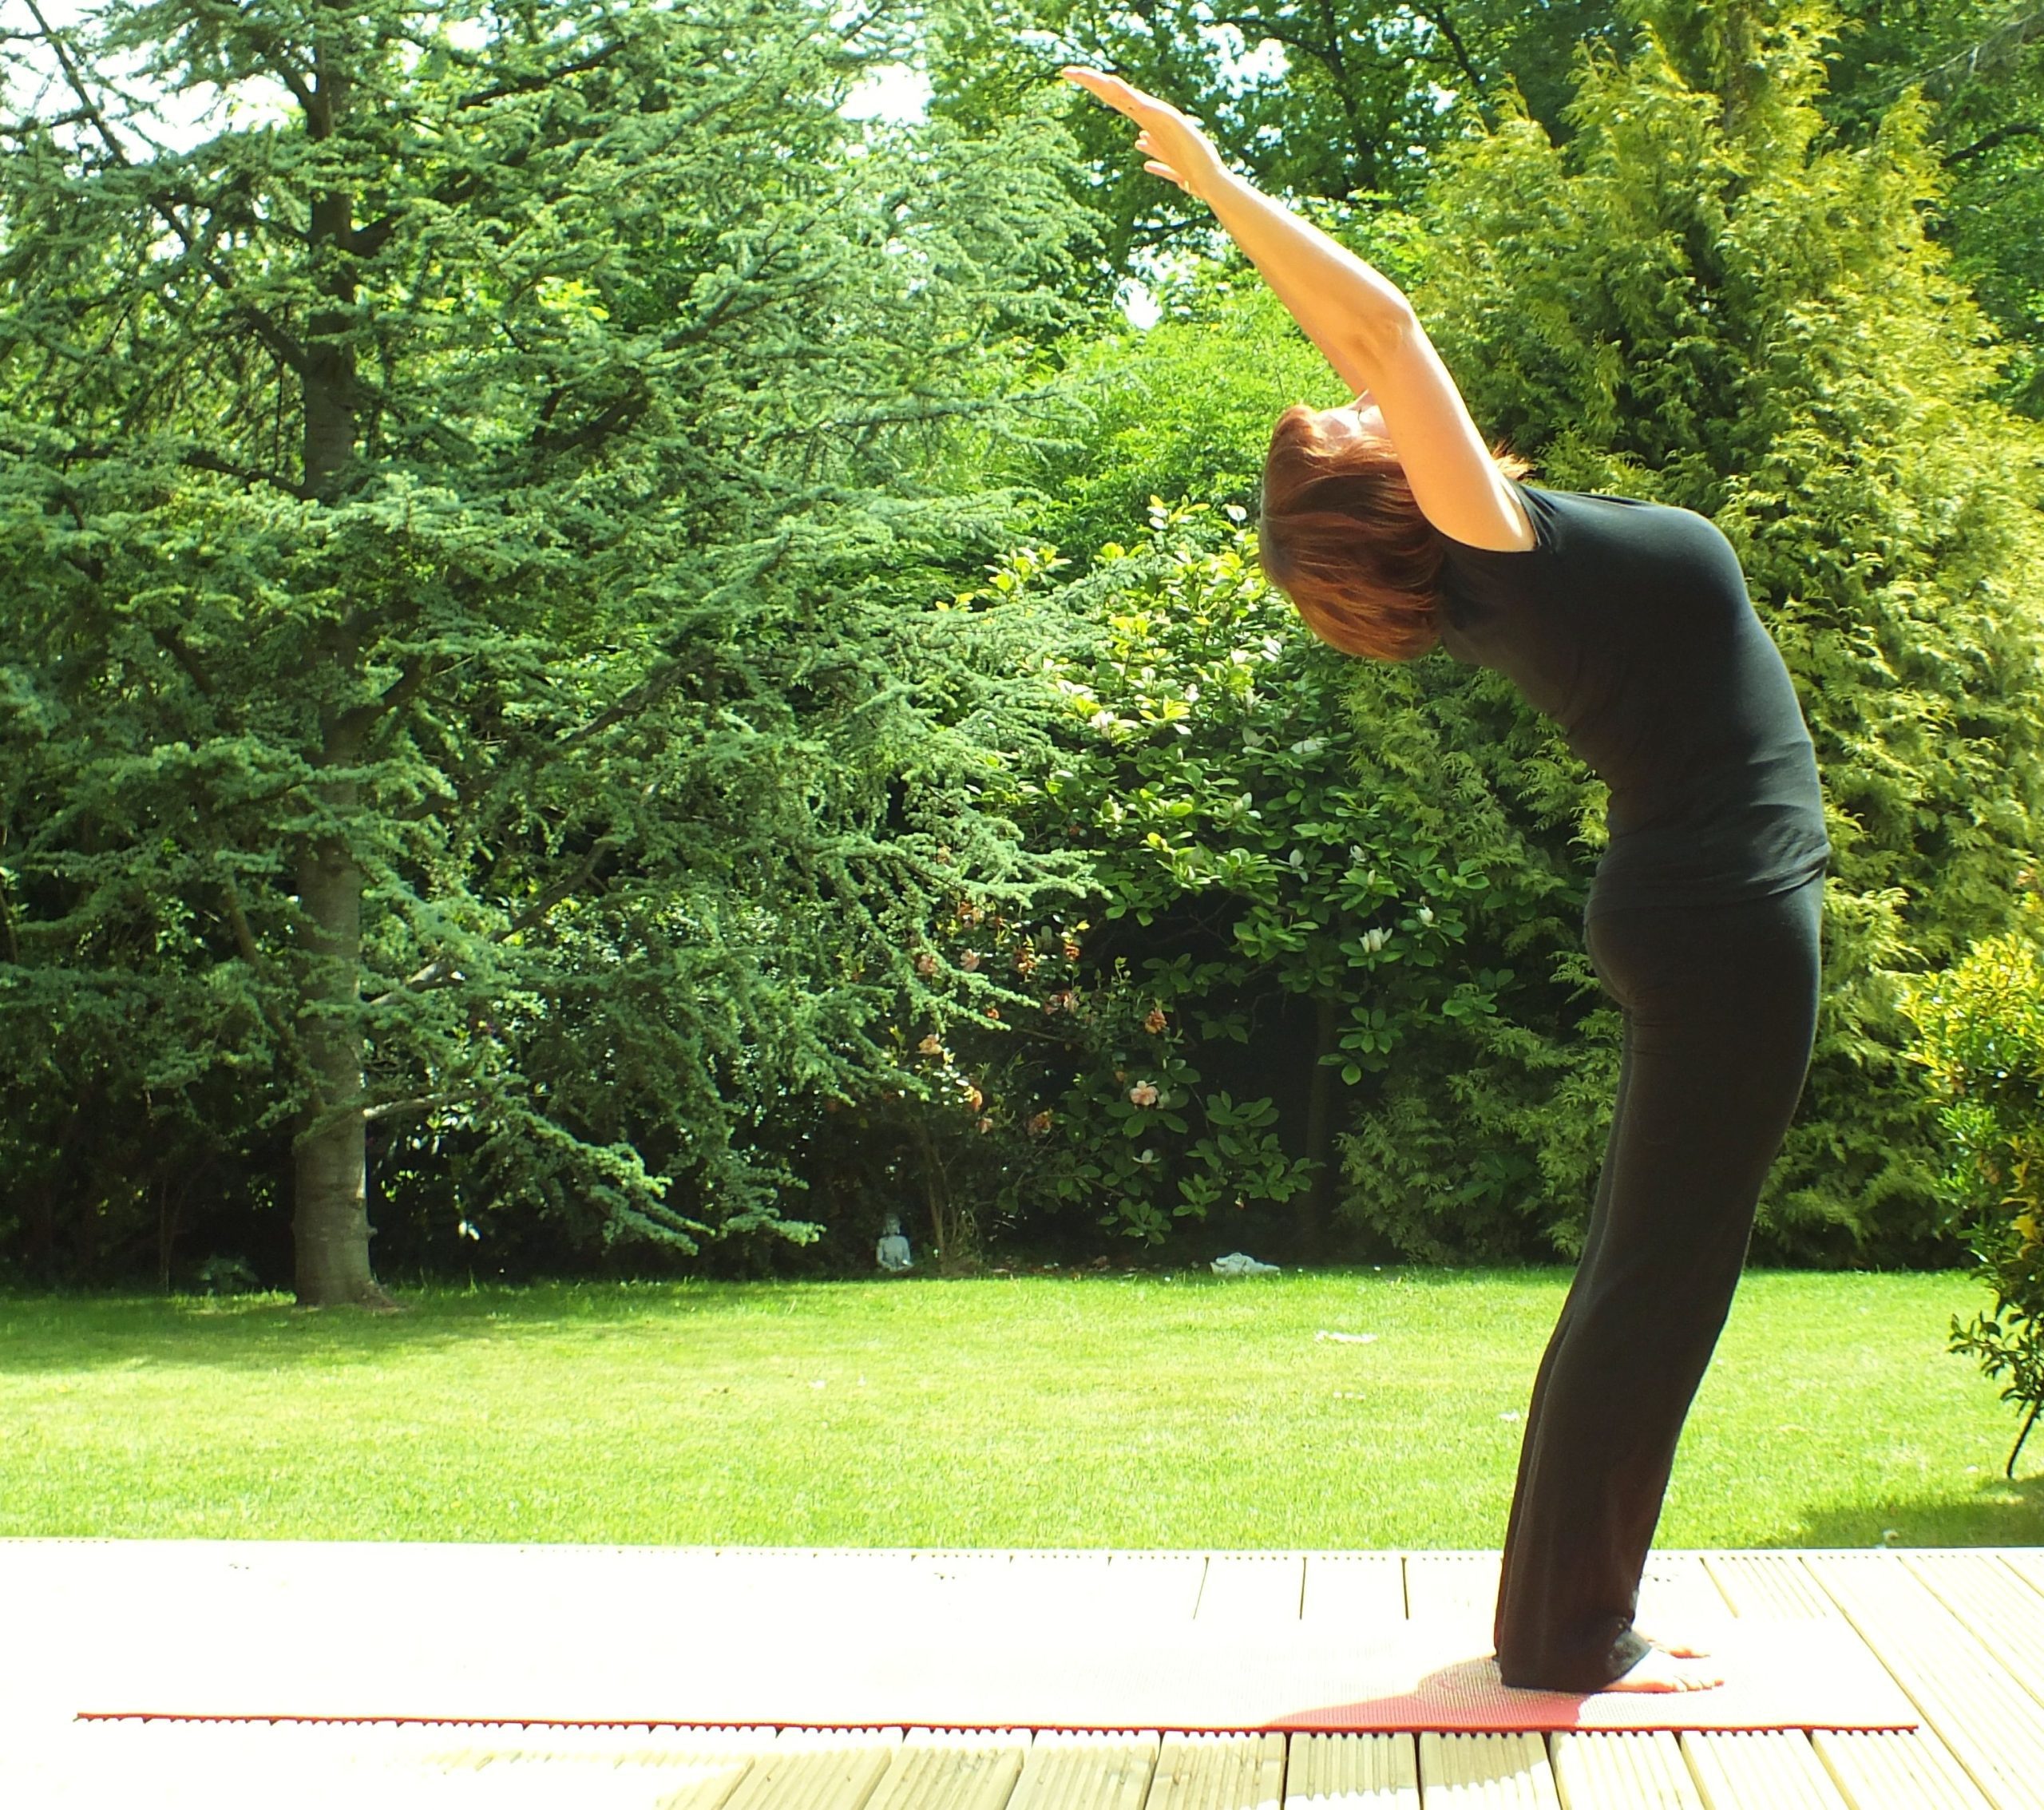 A Woman performing a backbend pose in yoga